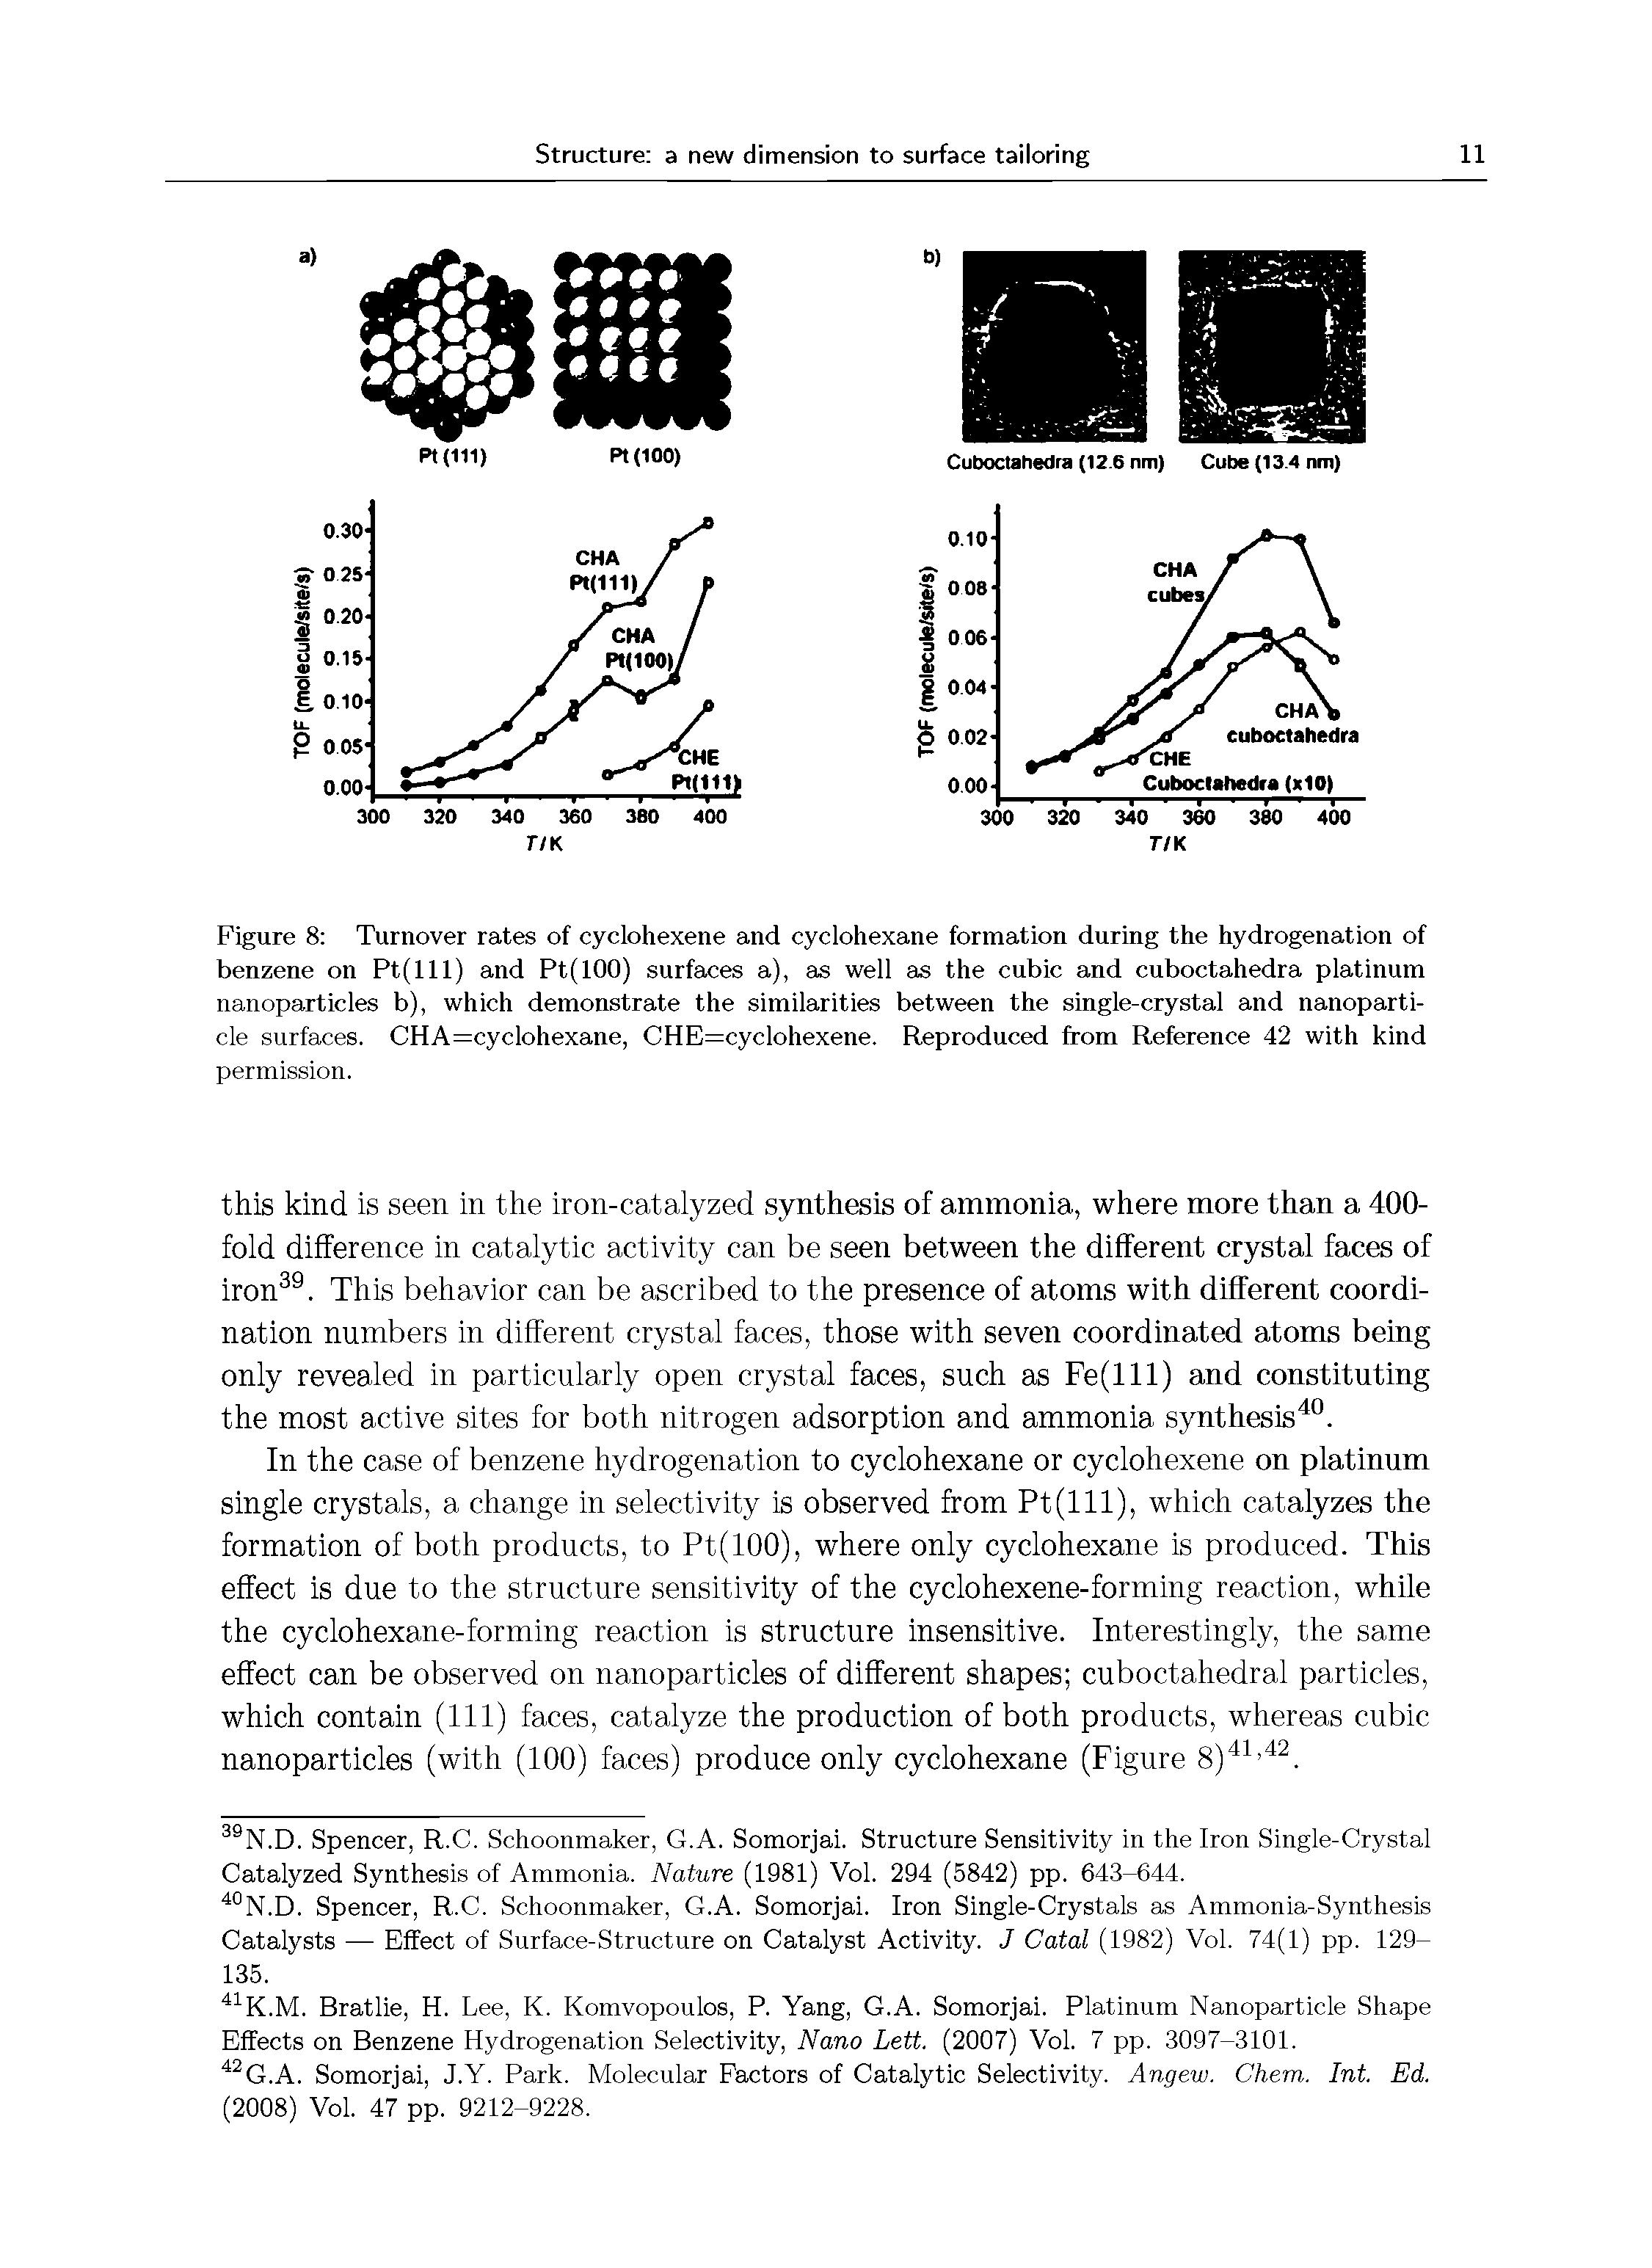 Figure 8 Turnover rates of cyclohexene and cyclohexane formation during the hydrogenation of benzene on Pt(lll) and Pt(lOO) surfaces a), as well as the cubic and cuboctahedra platinum nanoparticles b), which demonstrate the similarities between the single-crystal and nanoparticle surfaces. CHA=cyclohexane, CHE=cyclohexene. Reproduced from Reference 42 with kind...